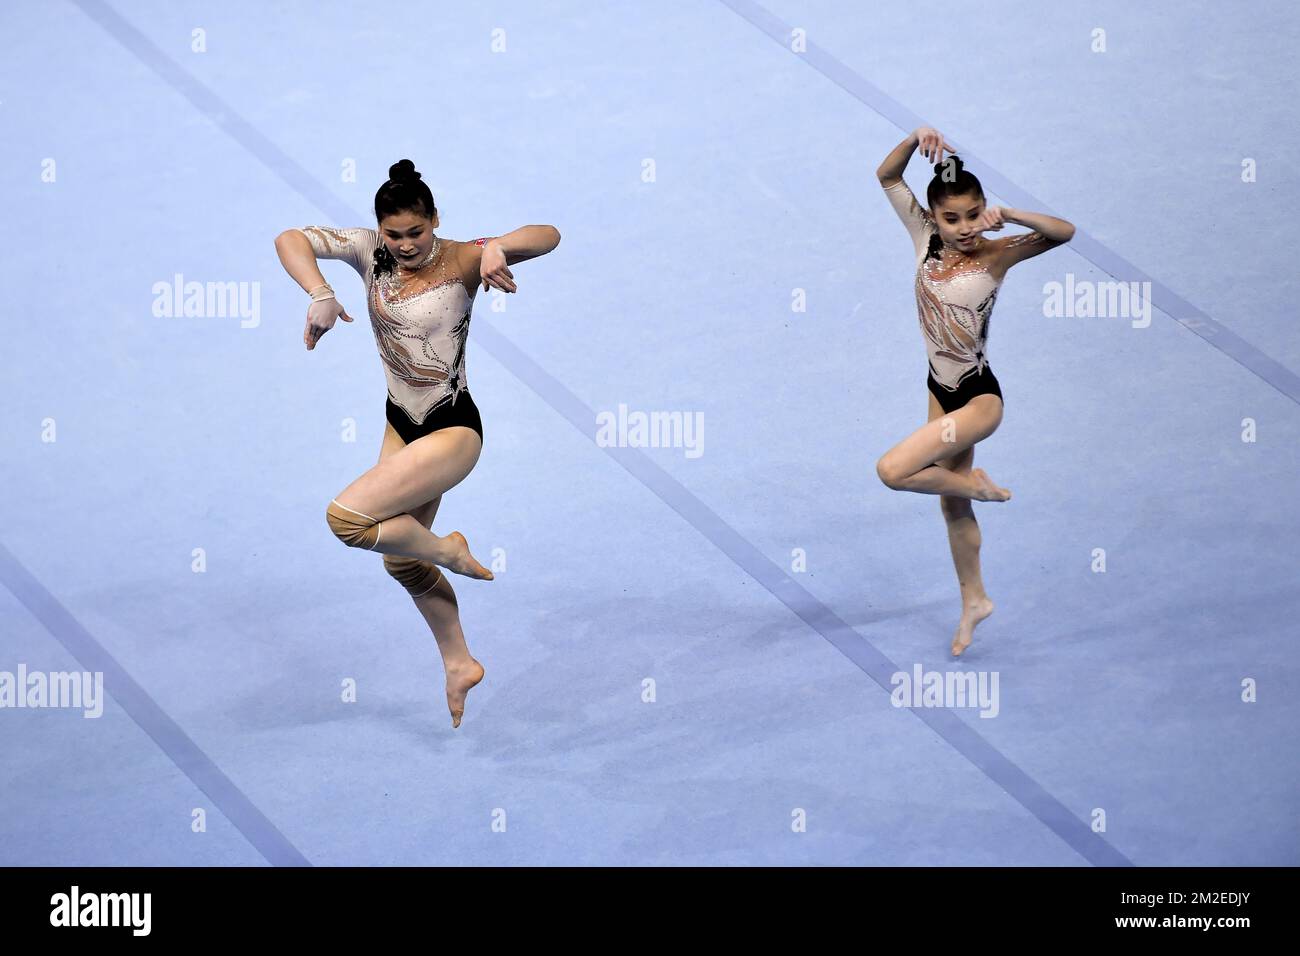 North Korea Pair Kum Hwa Jong and Yun ae Pyong pictured in action during the second day of the 26th edition of the world championships acrobatic gymnastics in Antwerp, Saturday 14 April 2018. BELGA PHOTO DIRK WAEM Stock Photo